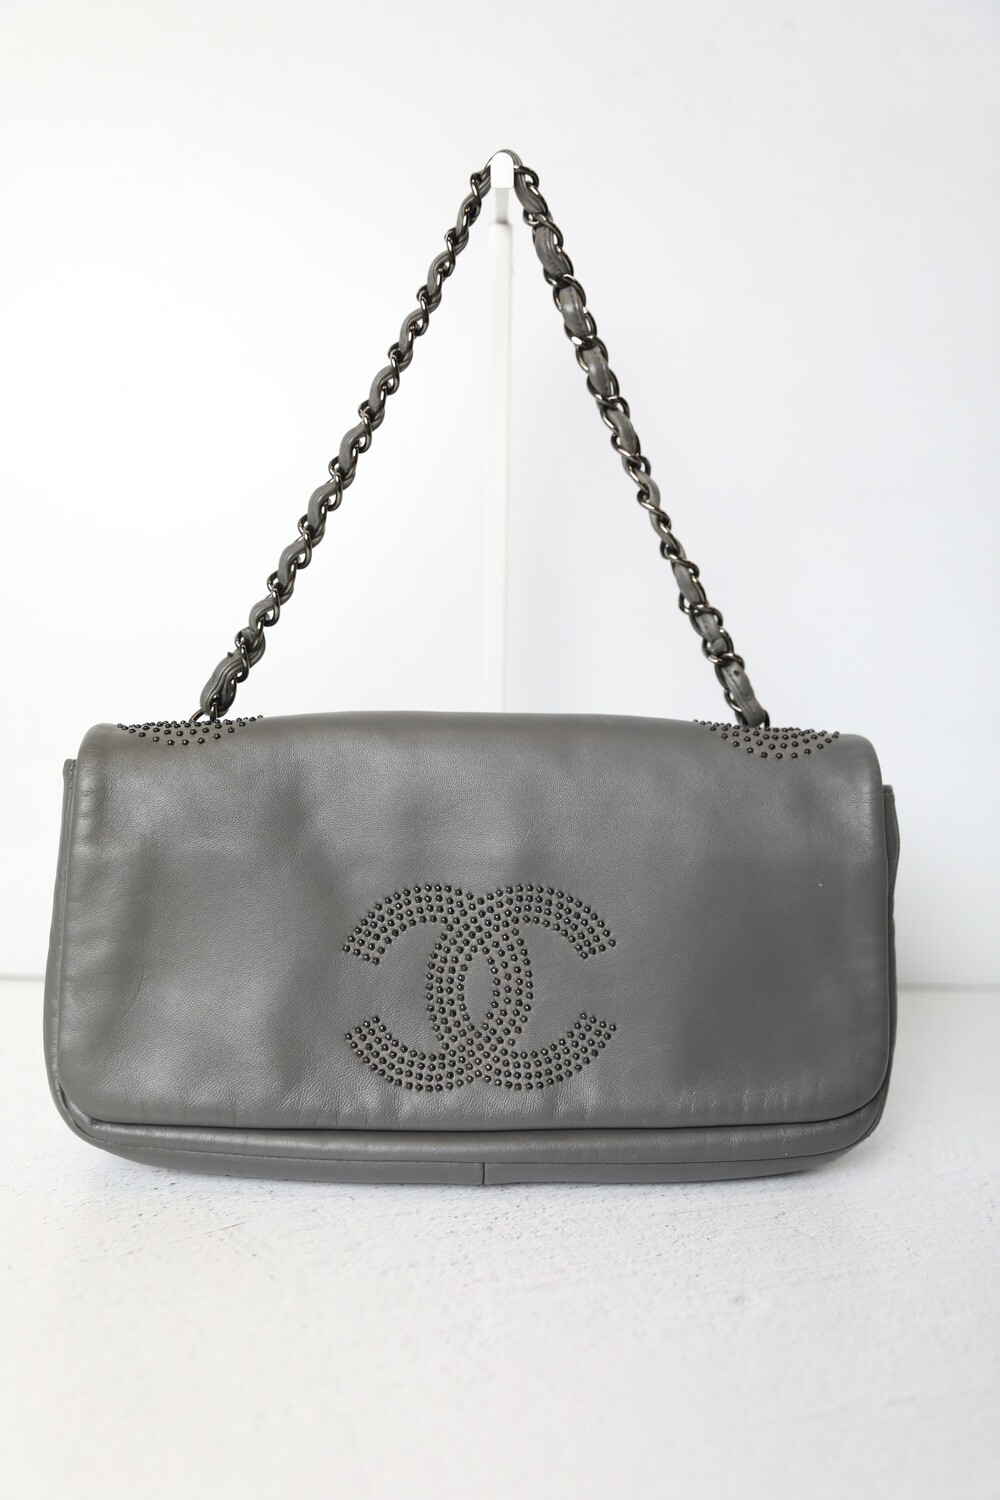 Chanel CC Studded Flap Shoulder Bag, Grey Leather with Shiny Ruthenium  Hardware, Preowned in Dustbag WA001